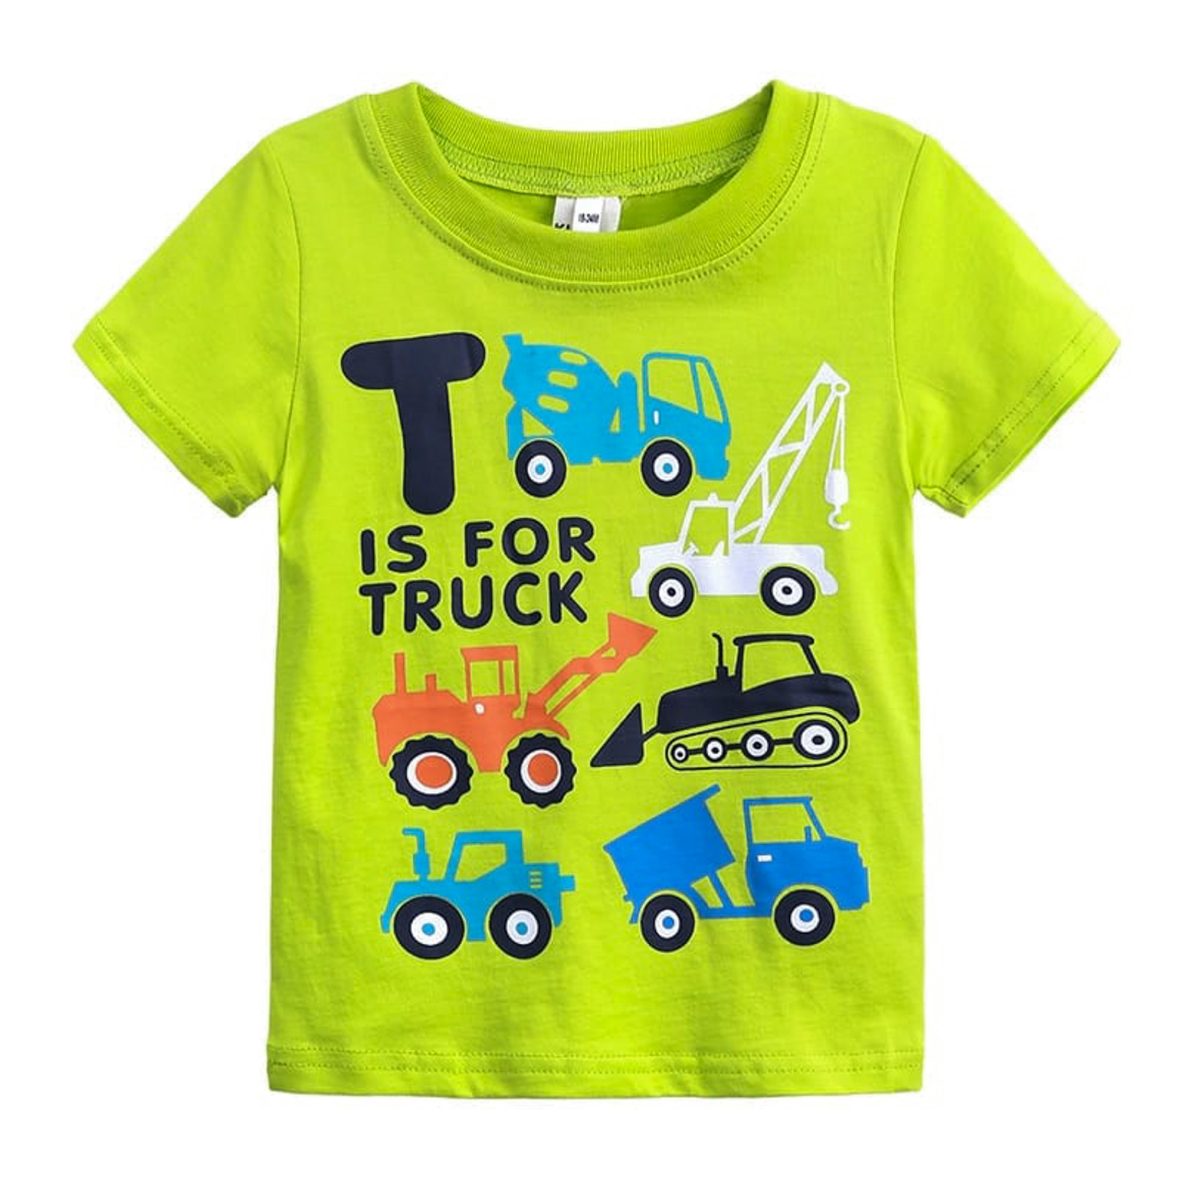 T Is For Truck